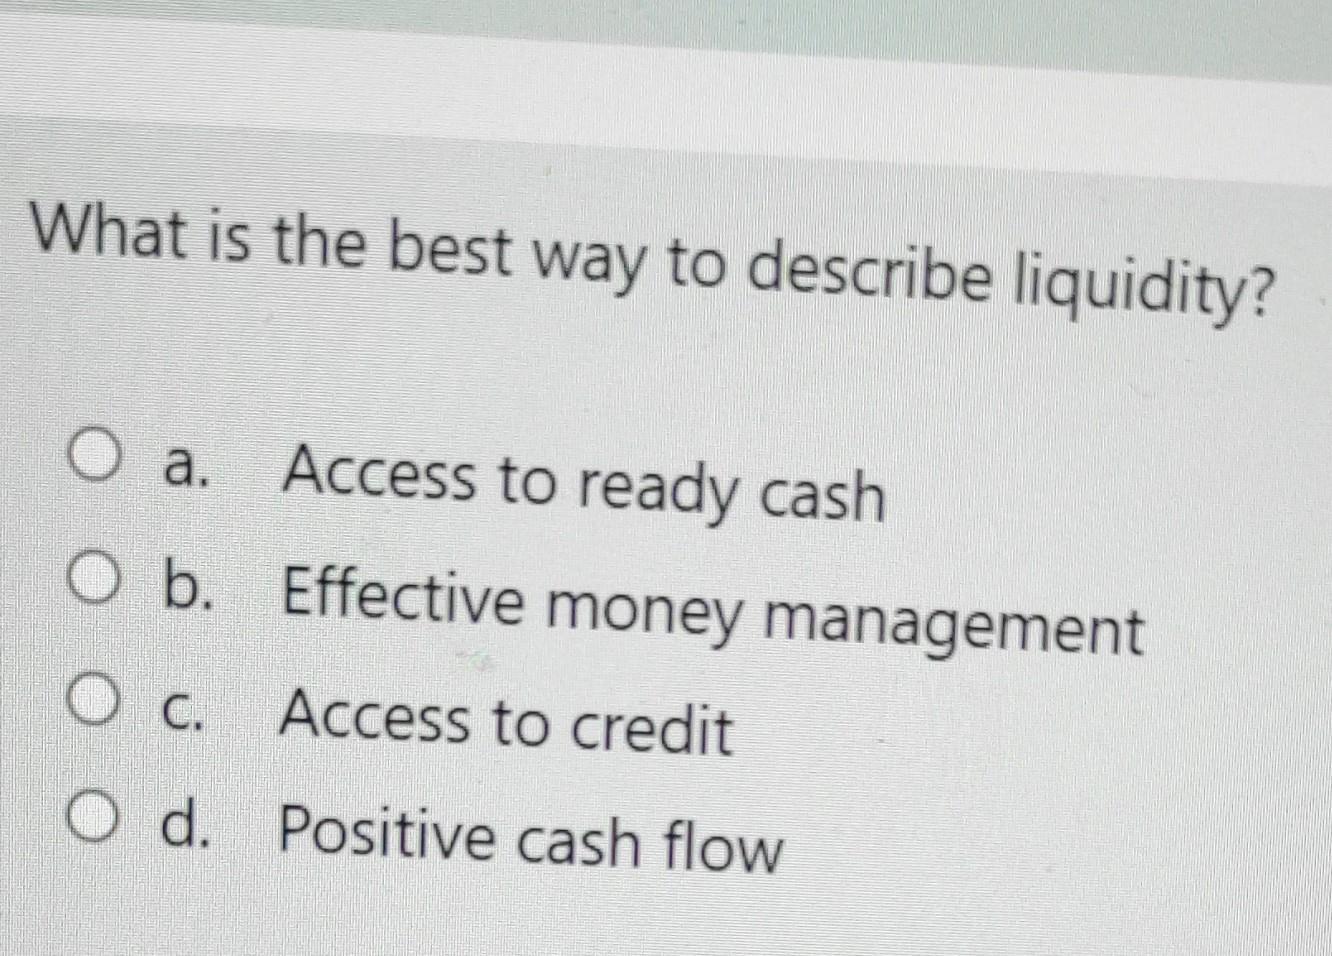 What is the best way to describe liquidity? aO a. Access to ready cash O b. Effective money management OC. Access to credit